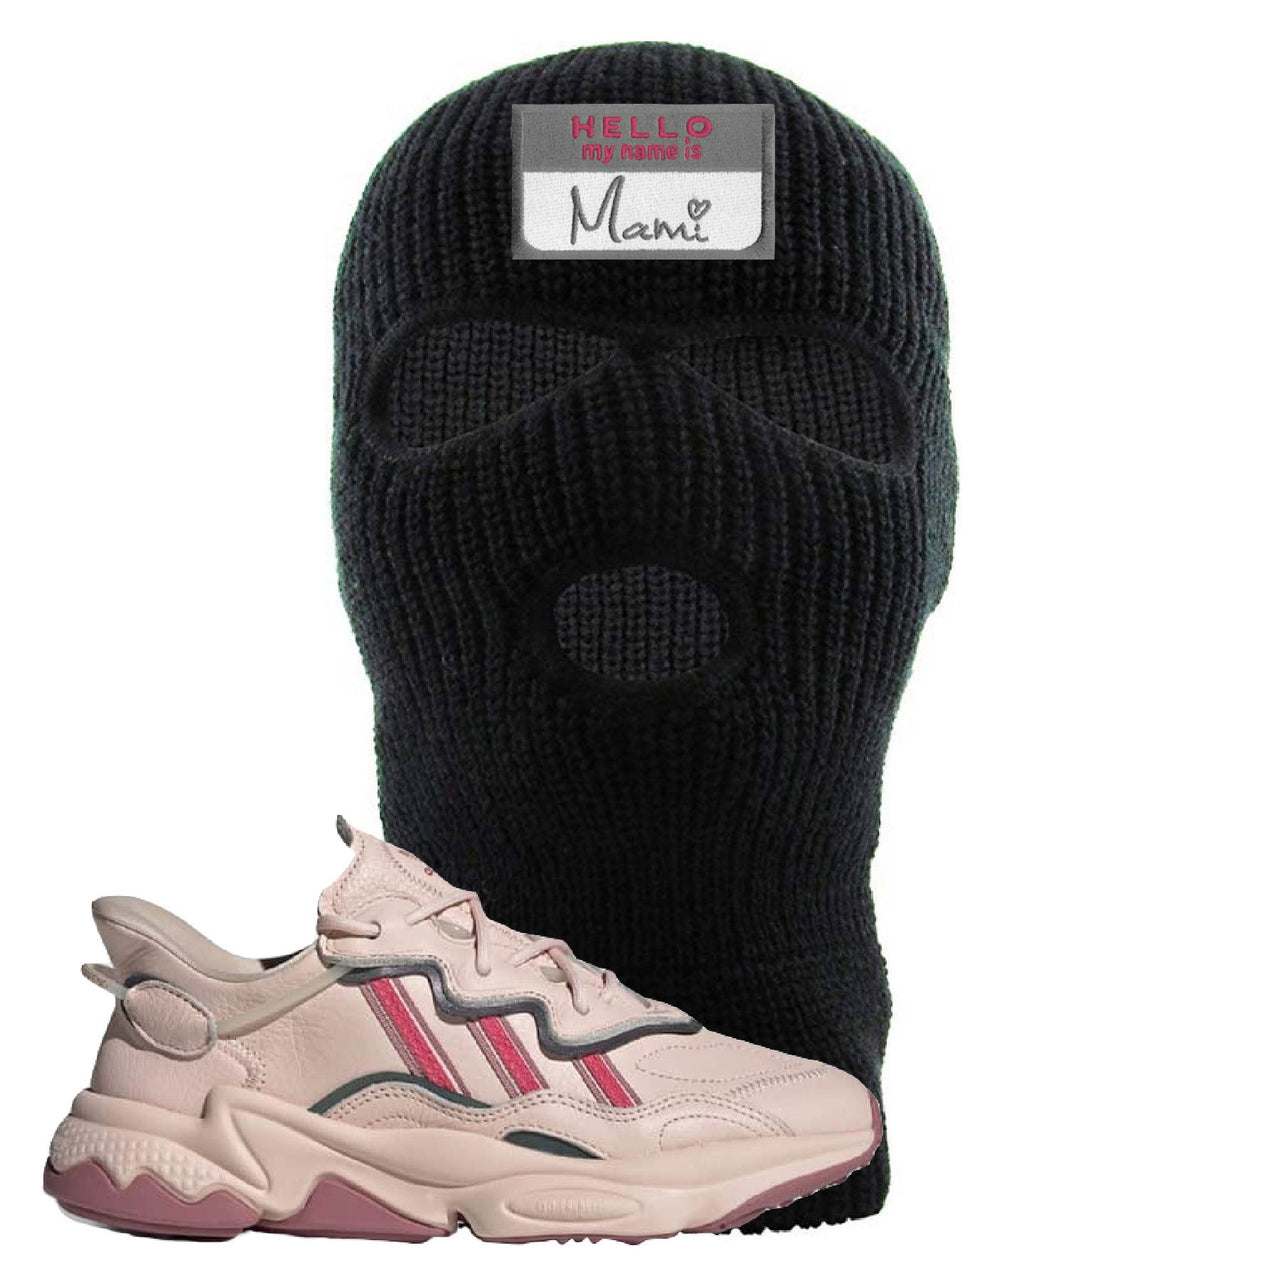 Adidas WMNS Ozweego Icy Pink Hello My Name is Mami Black Sneaker Hook Up Ski Mask